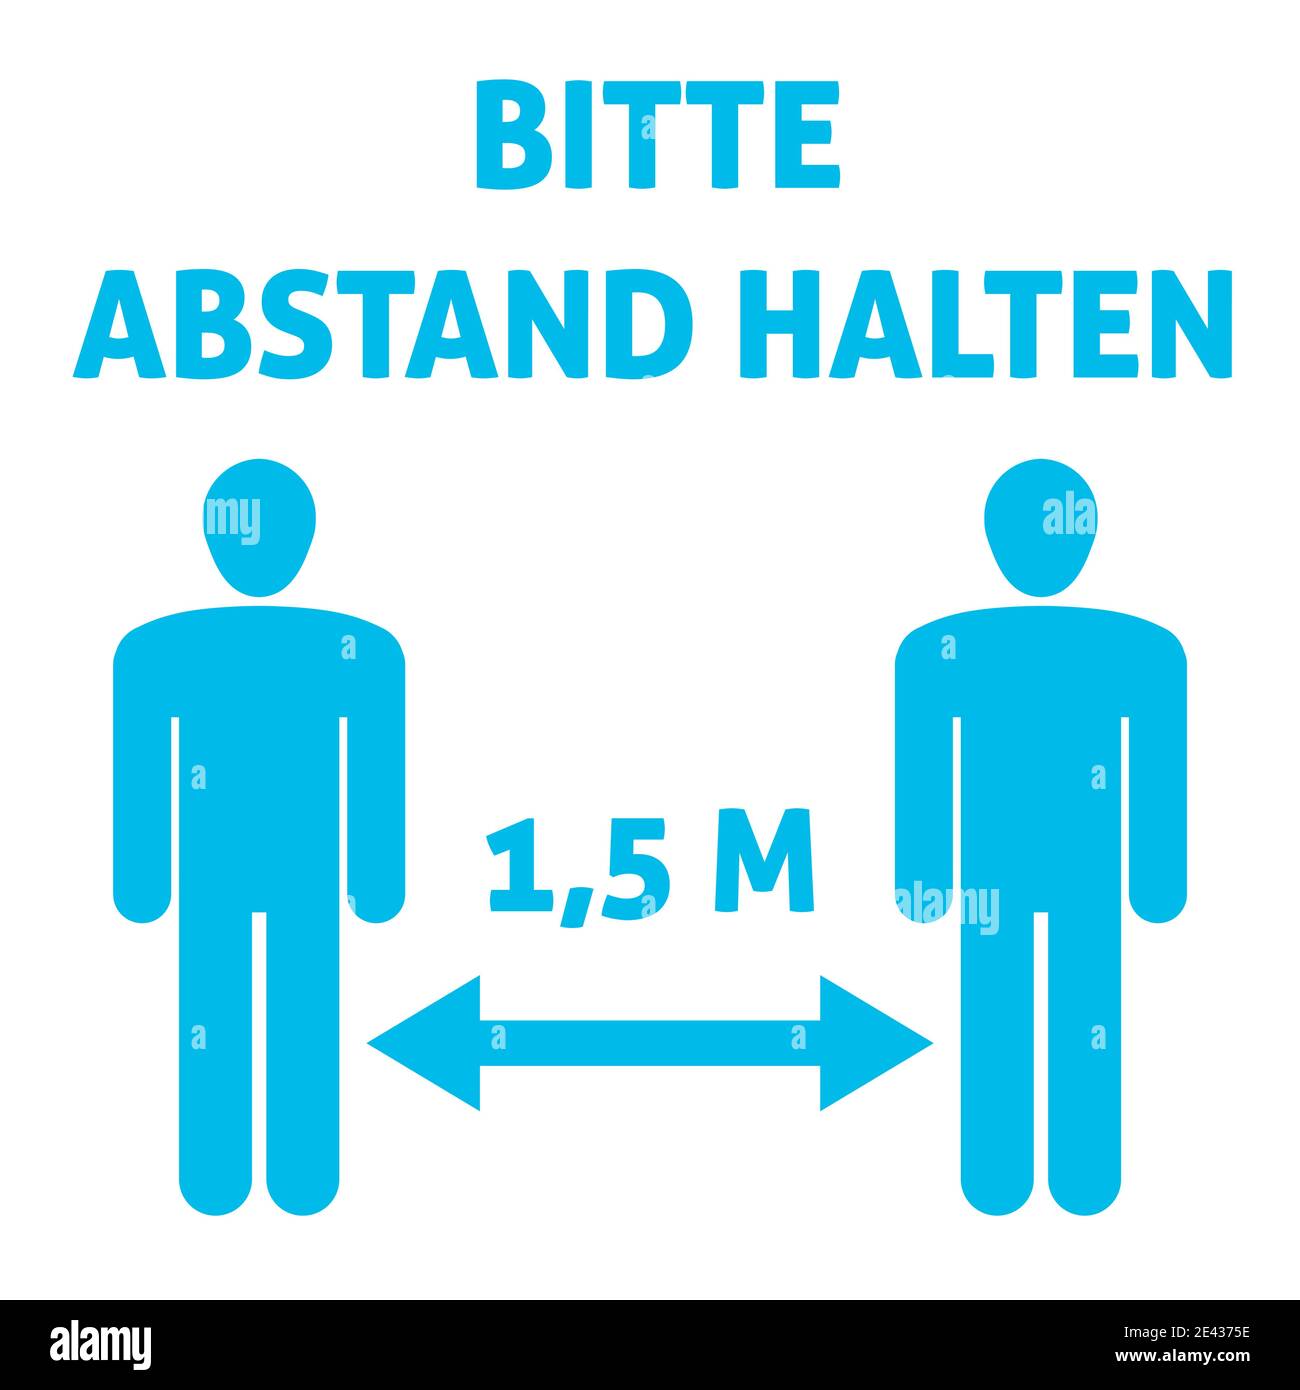 Social distancing sign in German language. Bitte abstand halten (English: Please keep distance). Epidemic safety. Vector illustration. Stock Vector